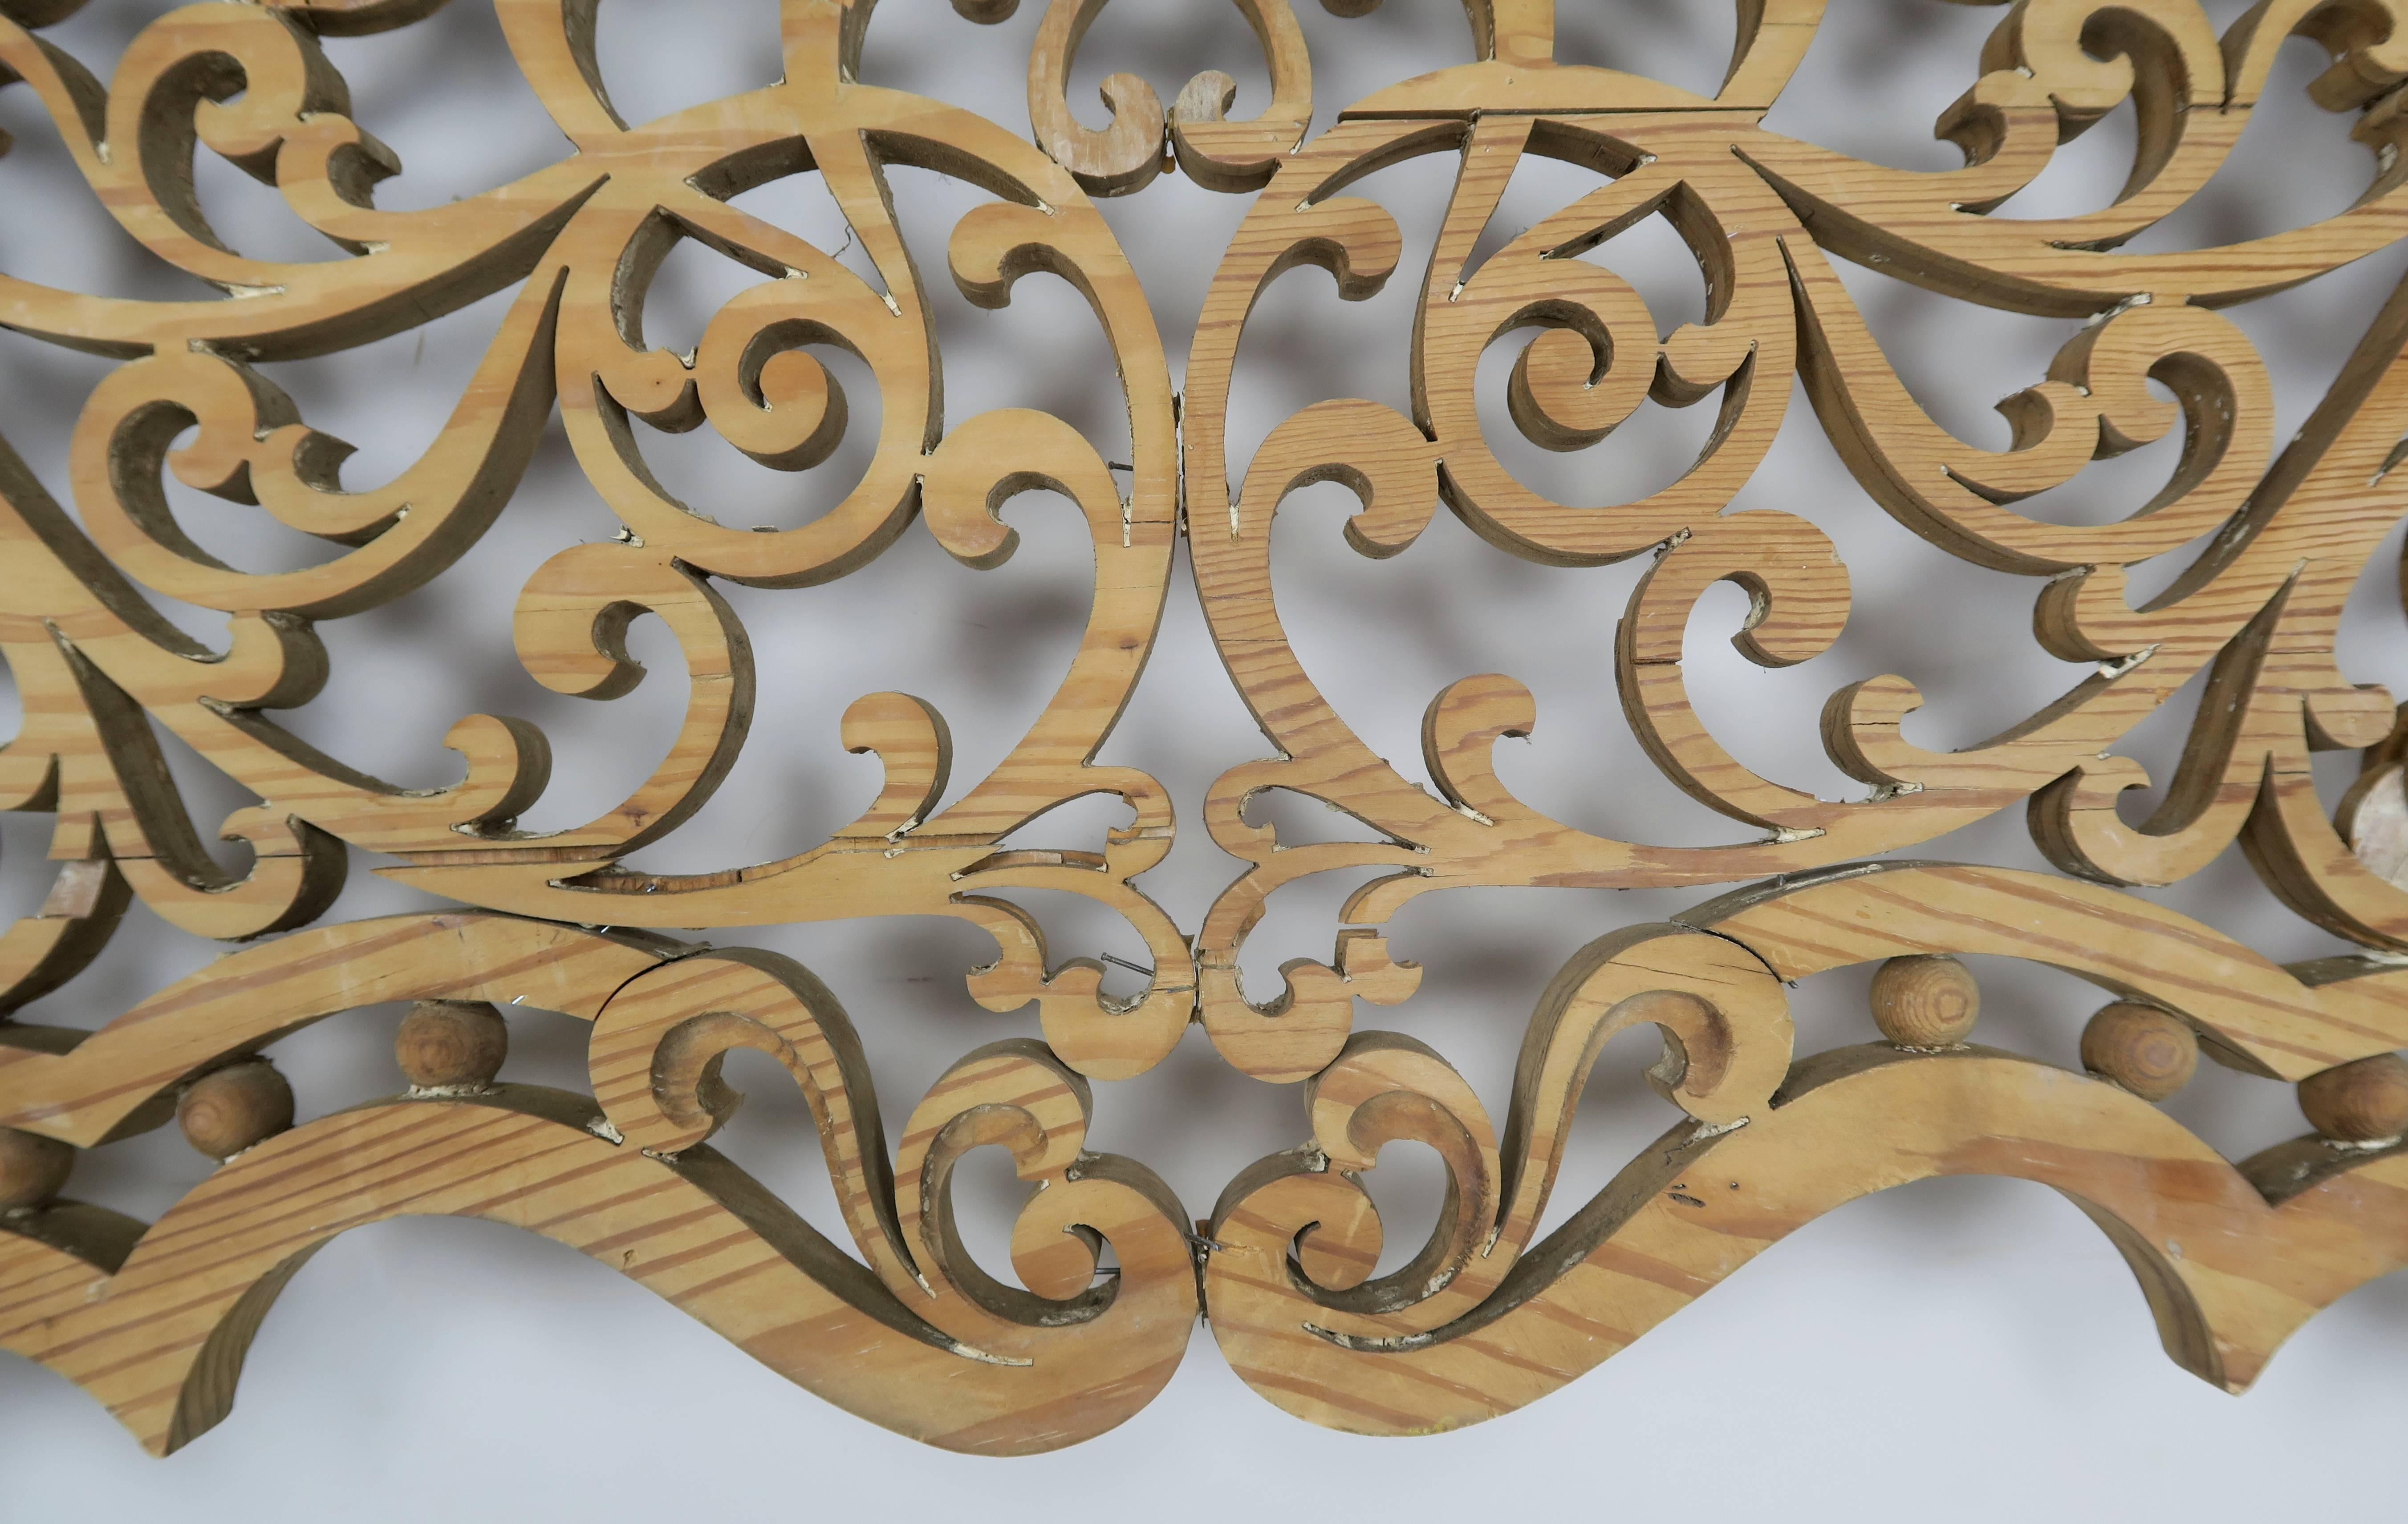 19th century wood carved architectural piece that could be upholstered in a headboard or built in to your current construction job. Intricate scrolled detailing throughout.